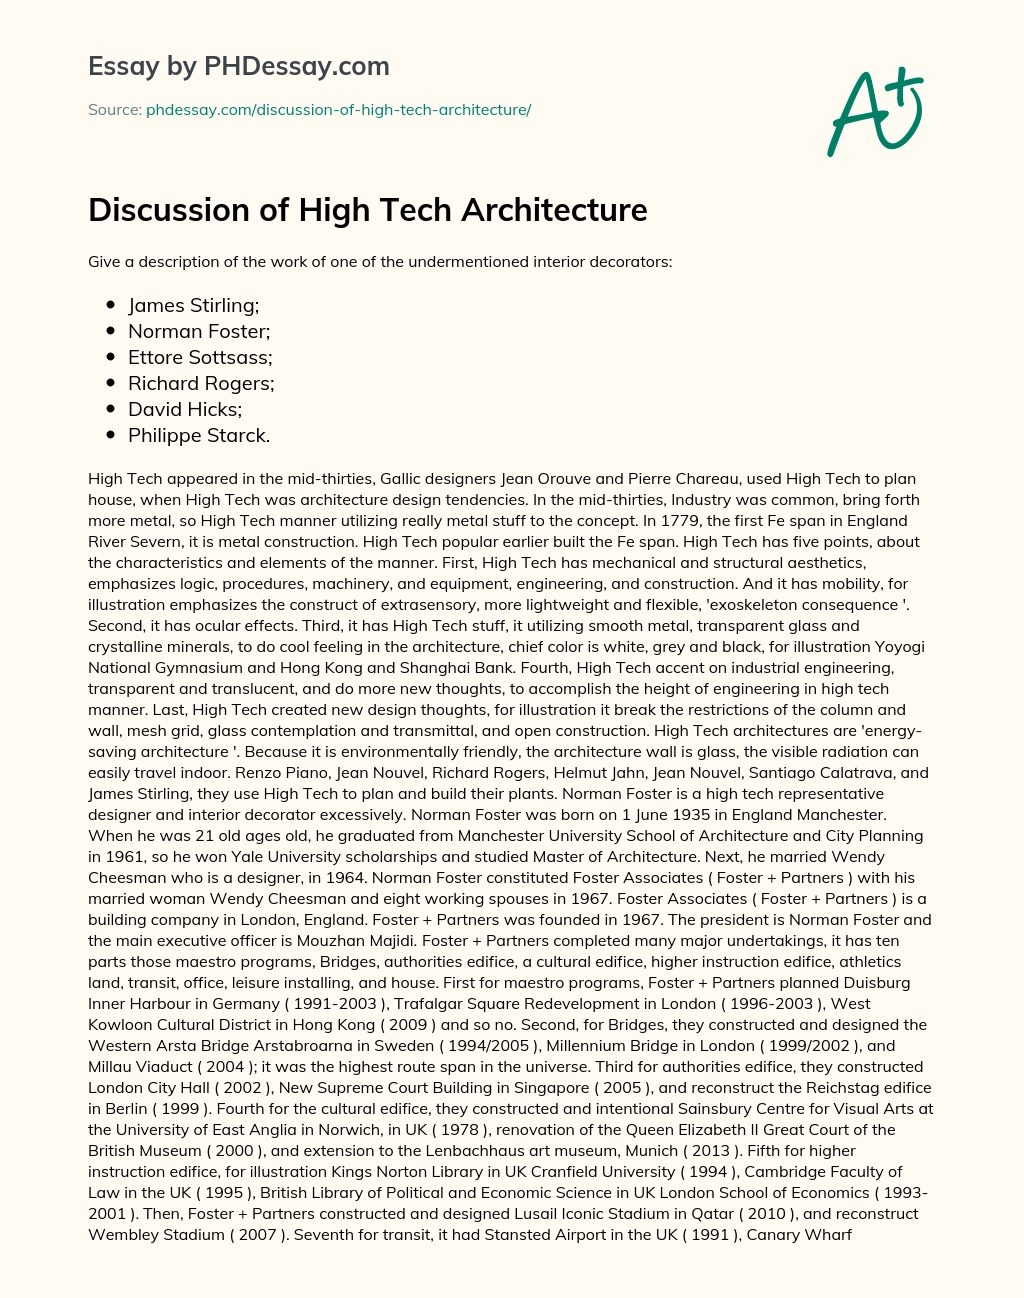 Discussion of High Tech Architecture essay